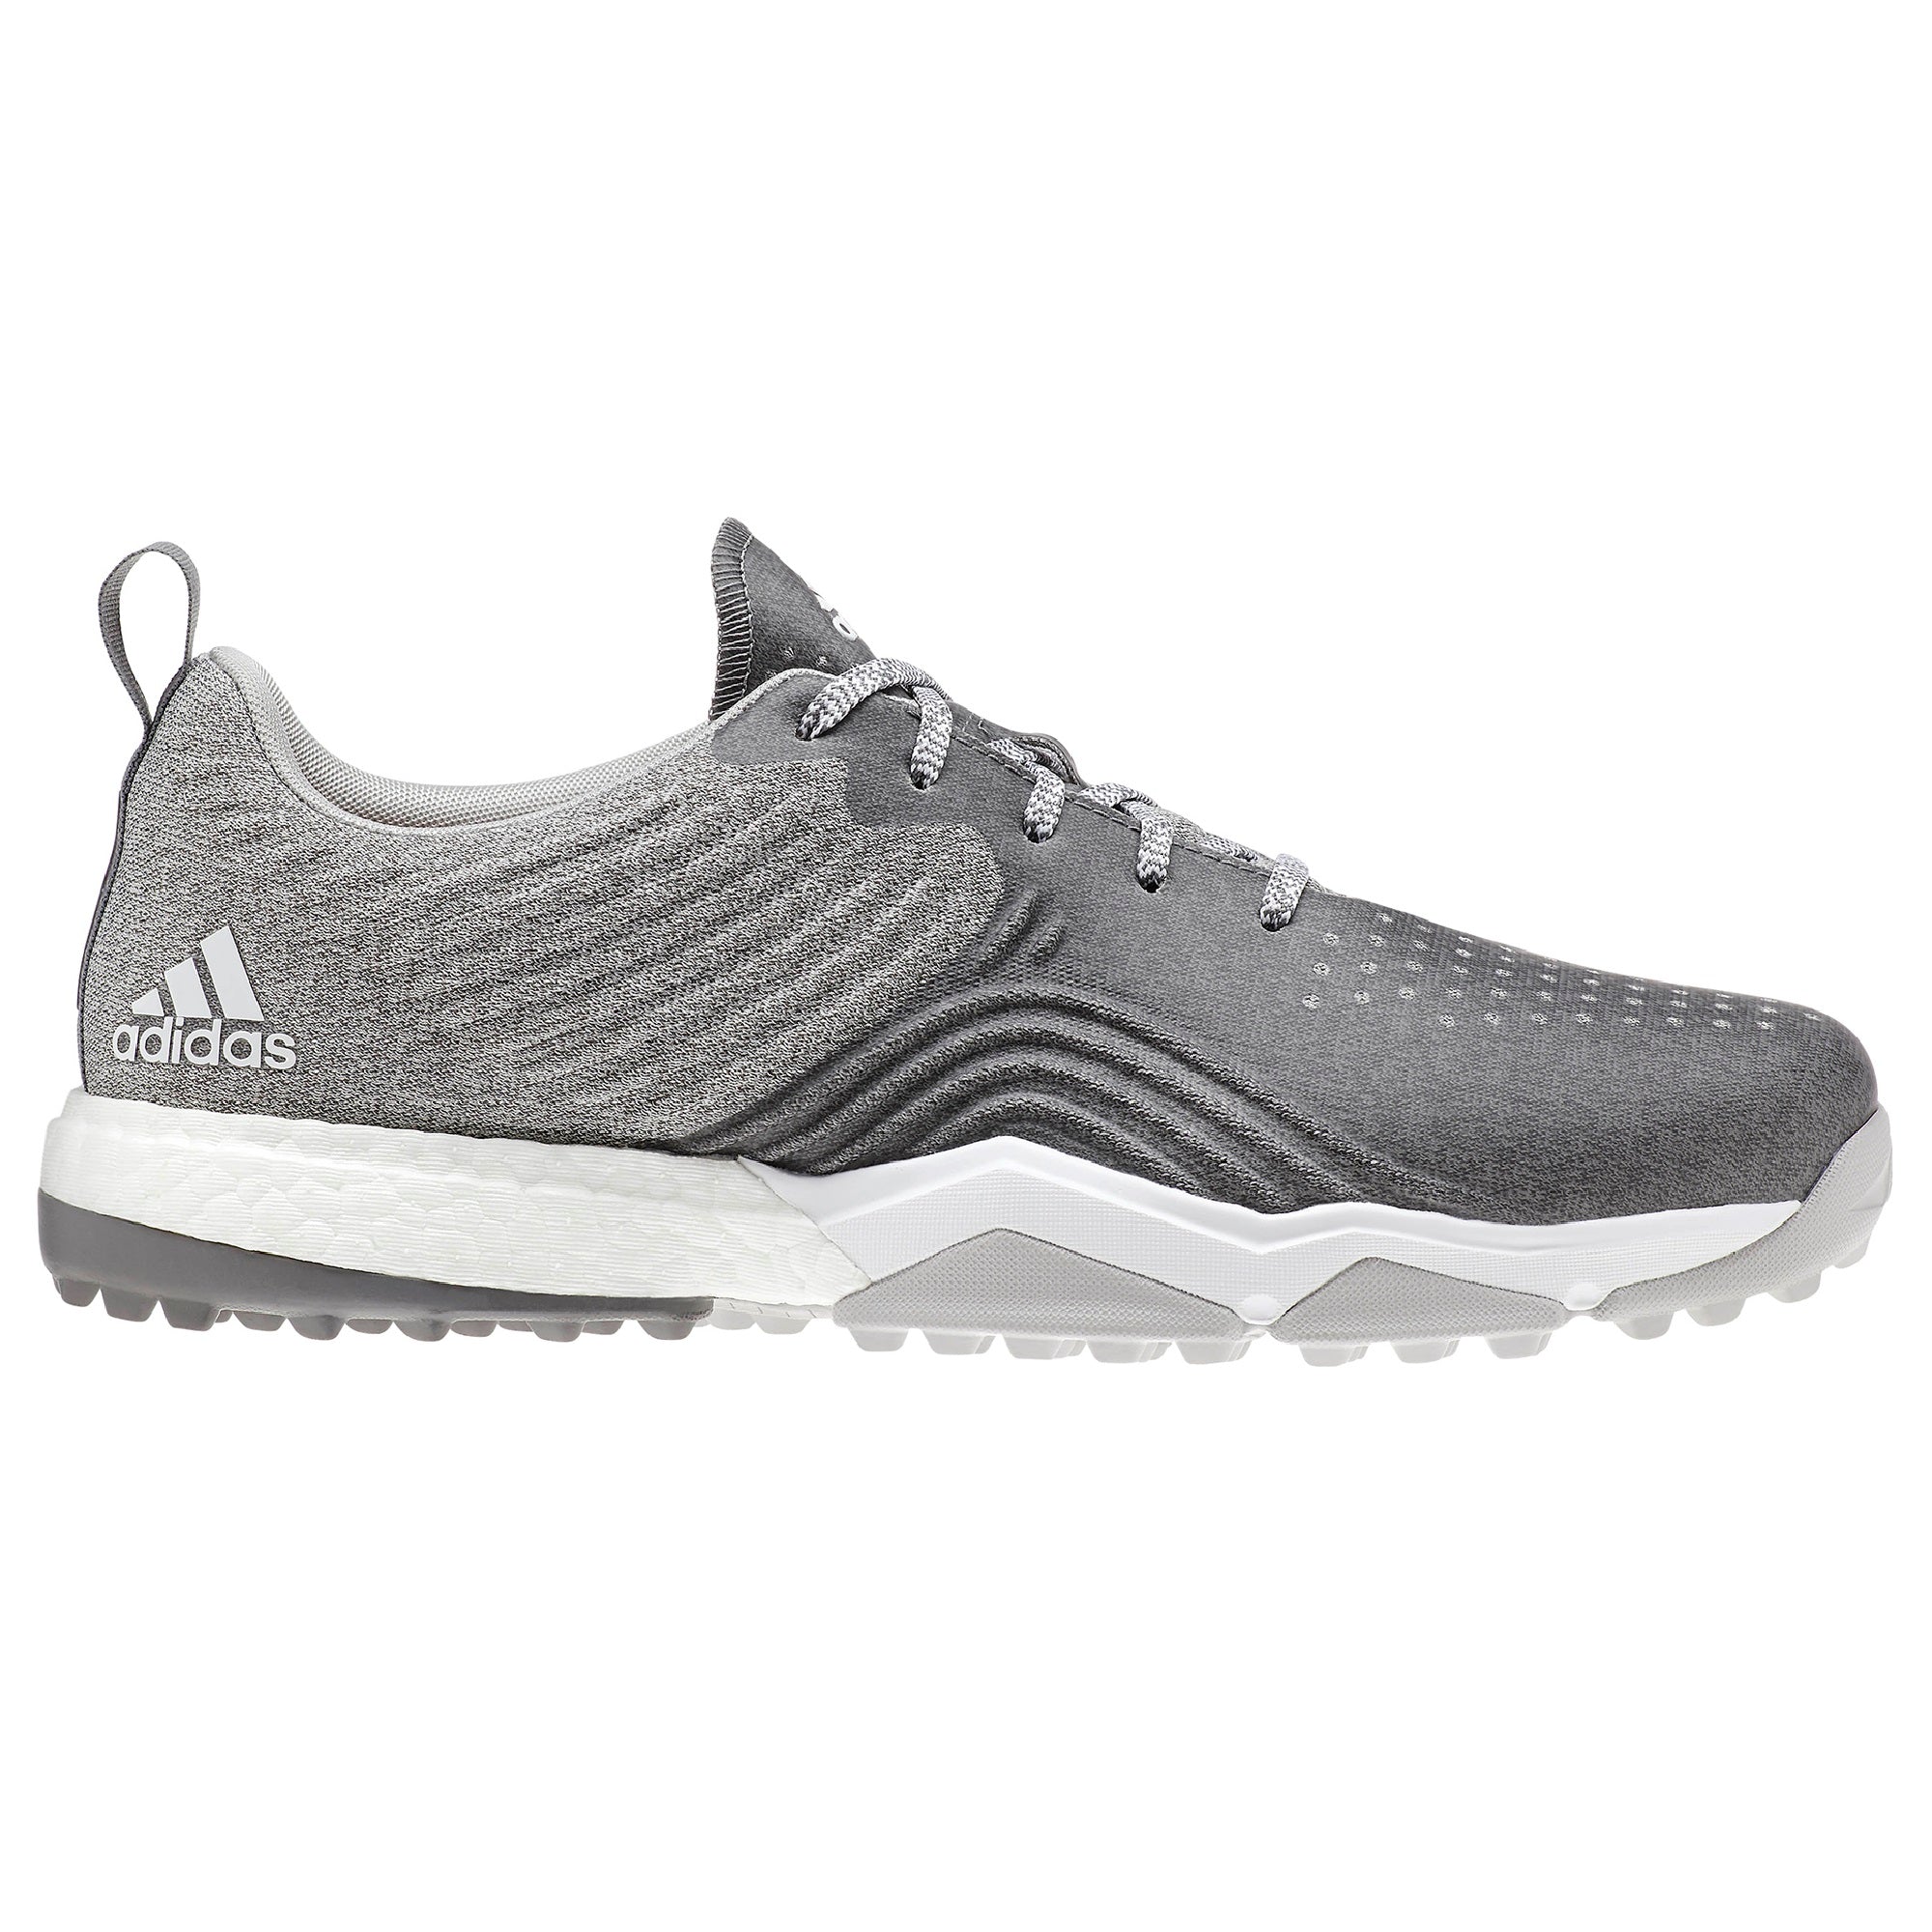 adidas adipower 4orged s golf shoes